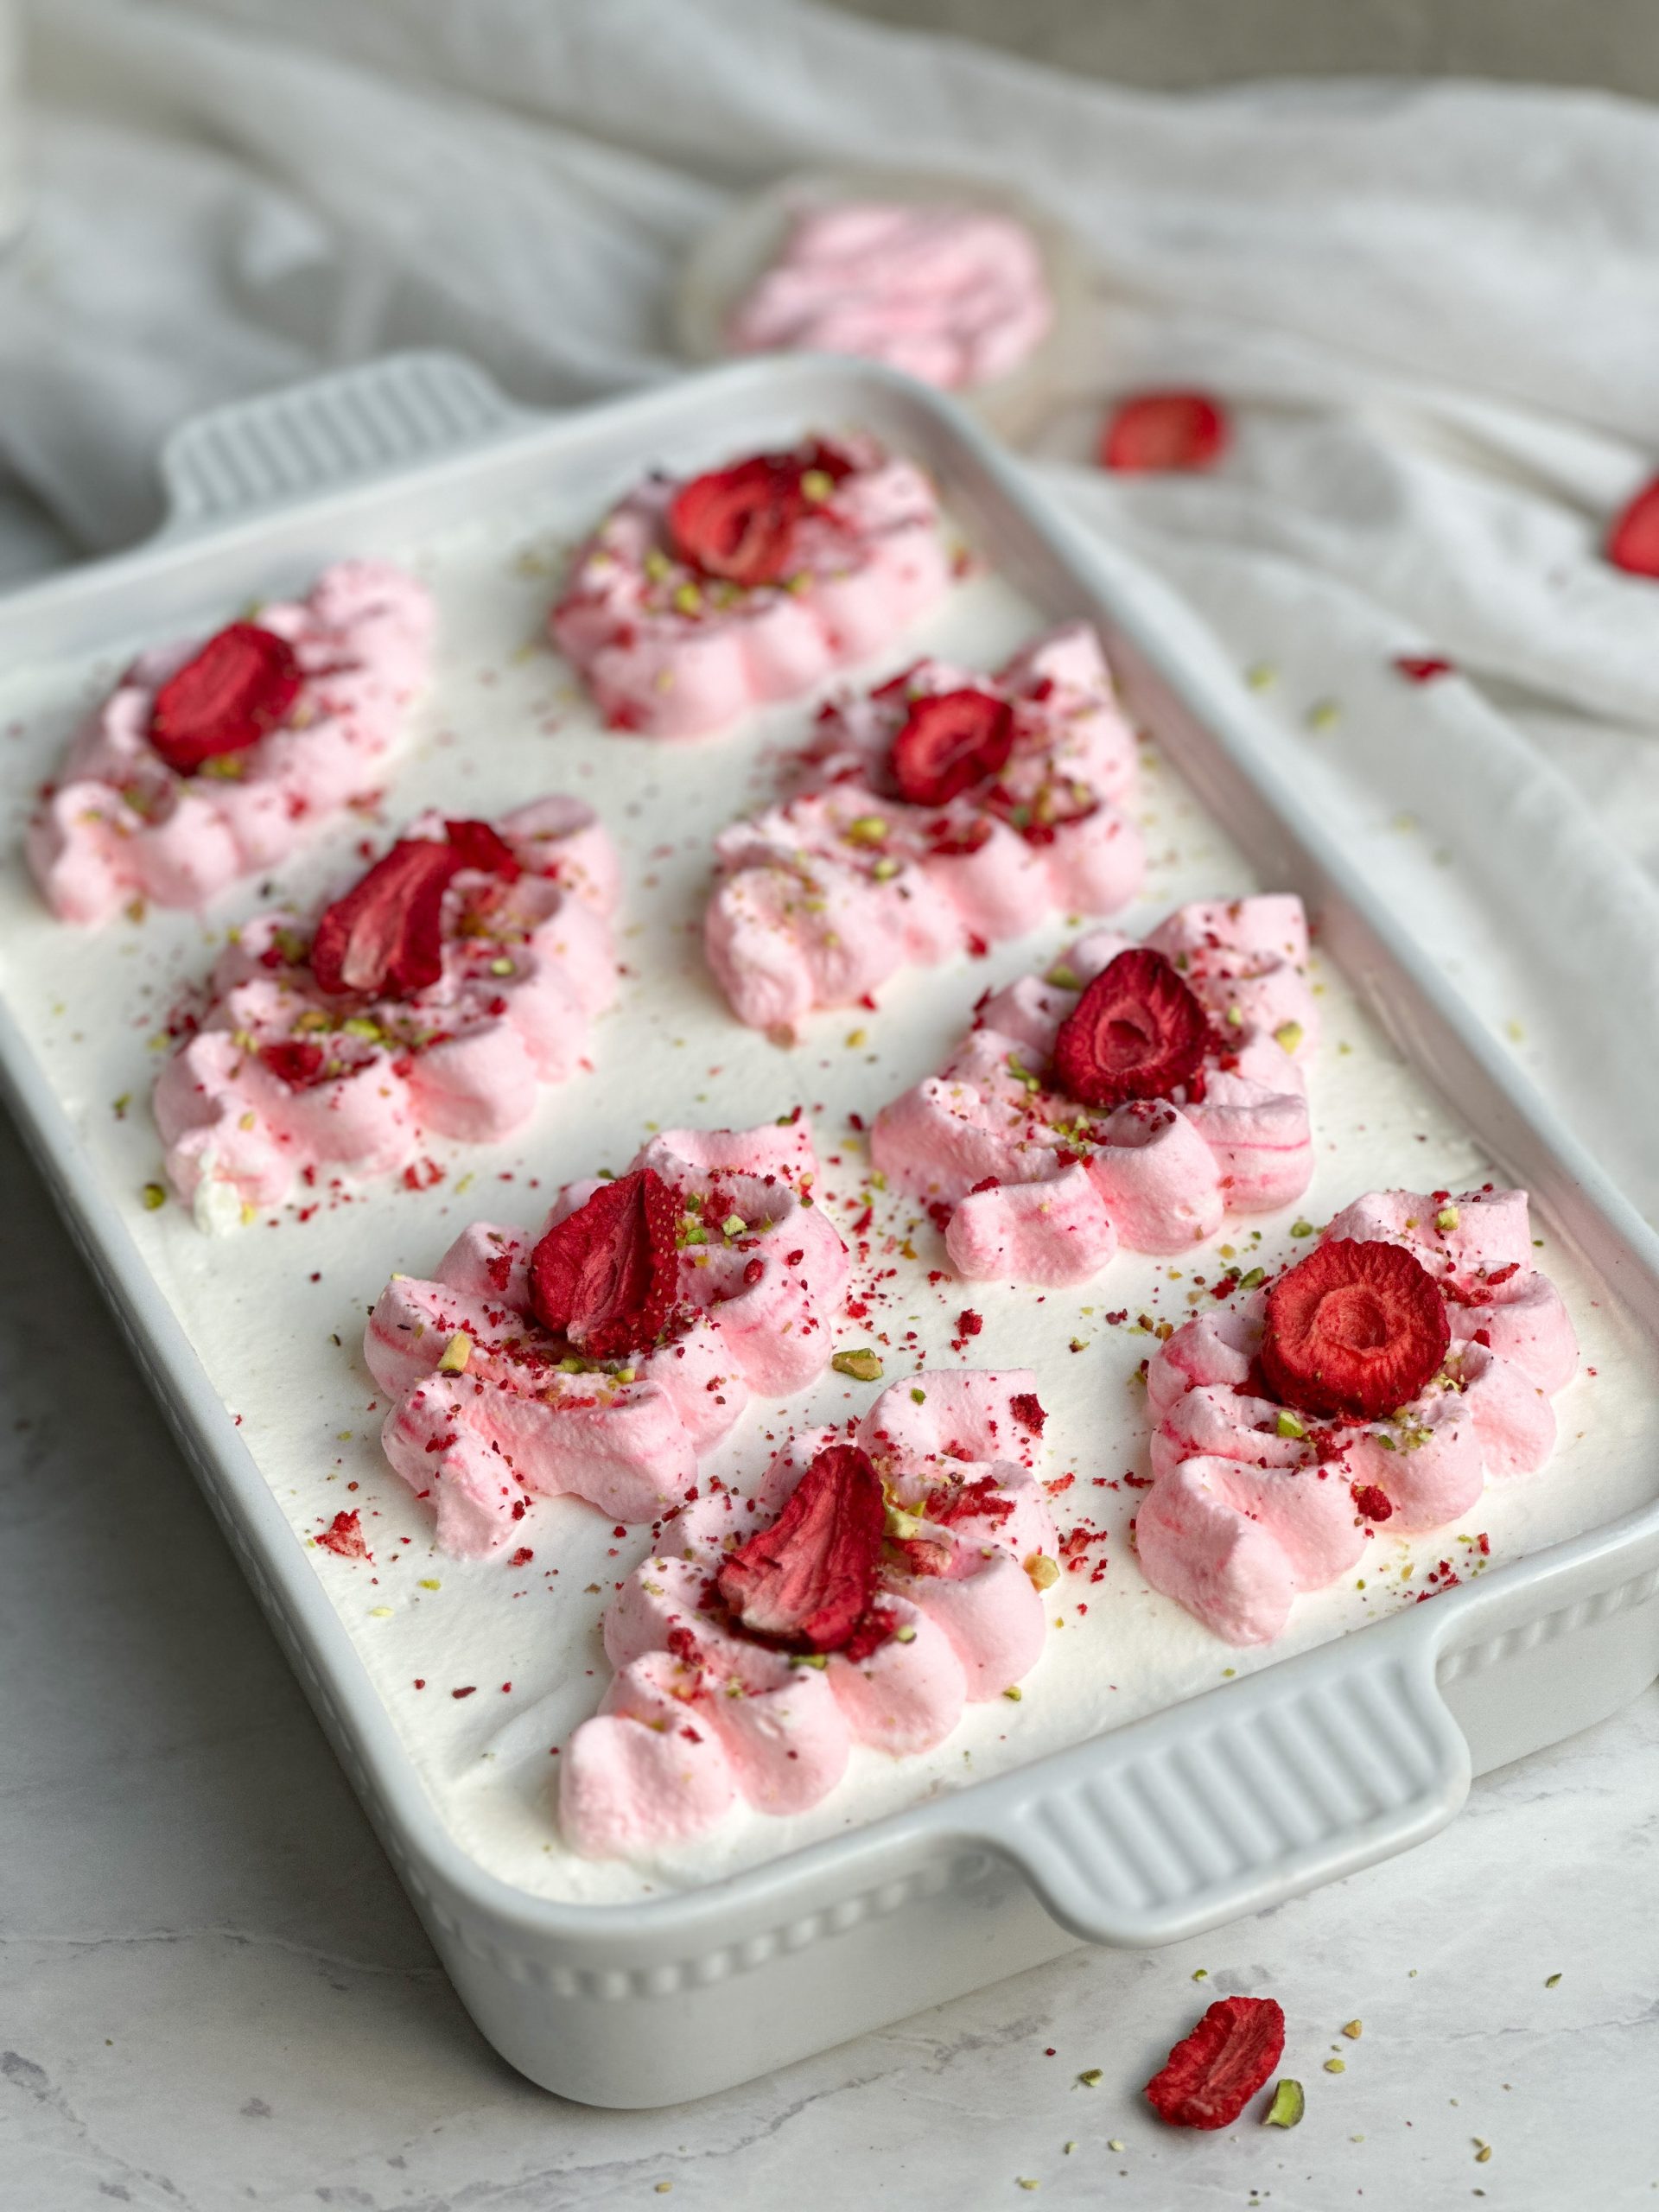 a baking dish with tres leches cake inside. cake has whipped cream spread on it, and light pink ribbons piped on top. it is decorated with freeze dried strawberries and chopped pistachios